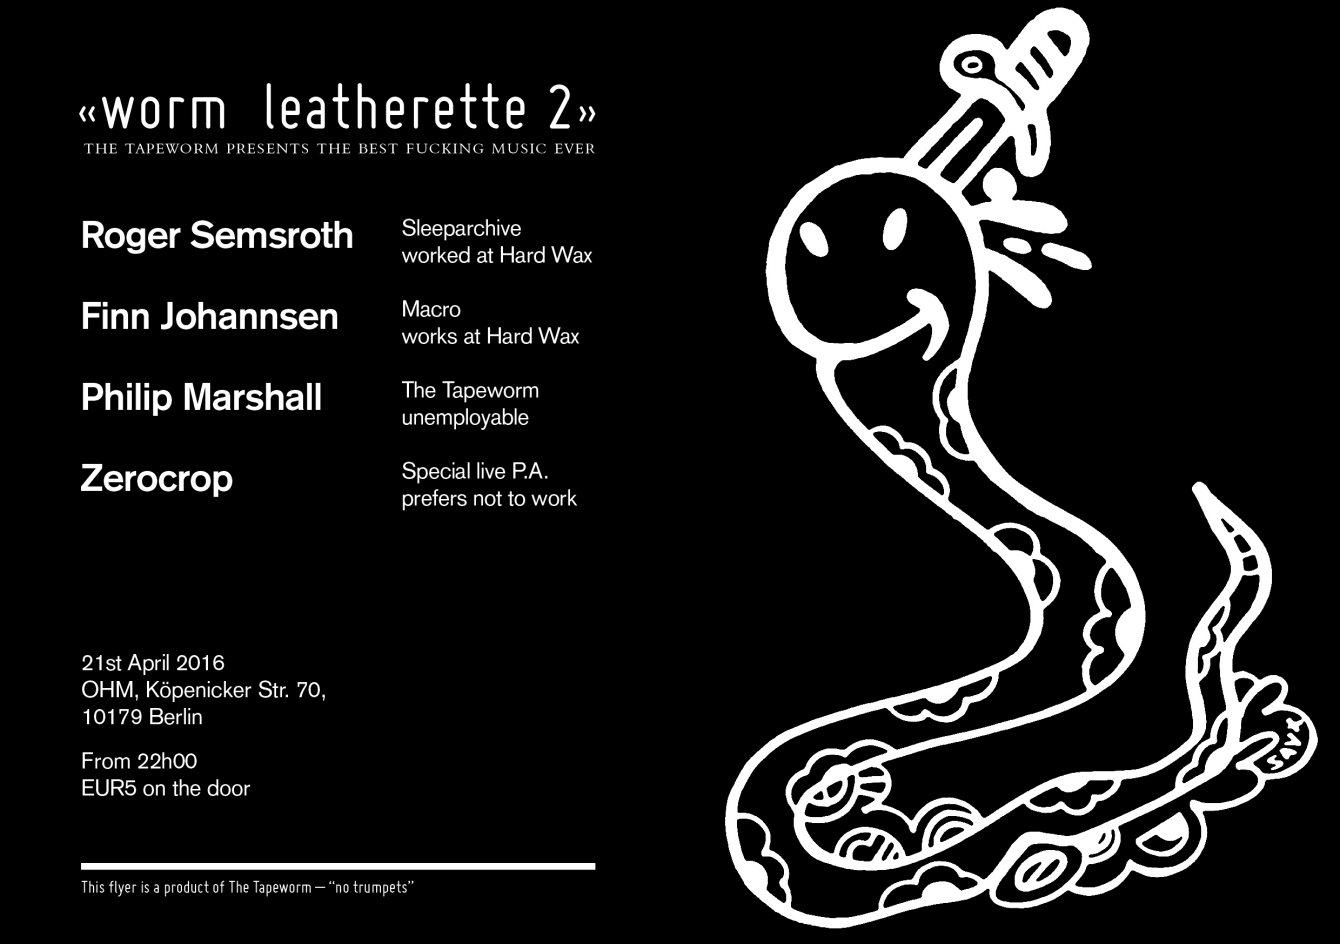 Worm Leatherette - Flyer front